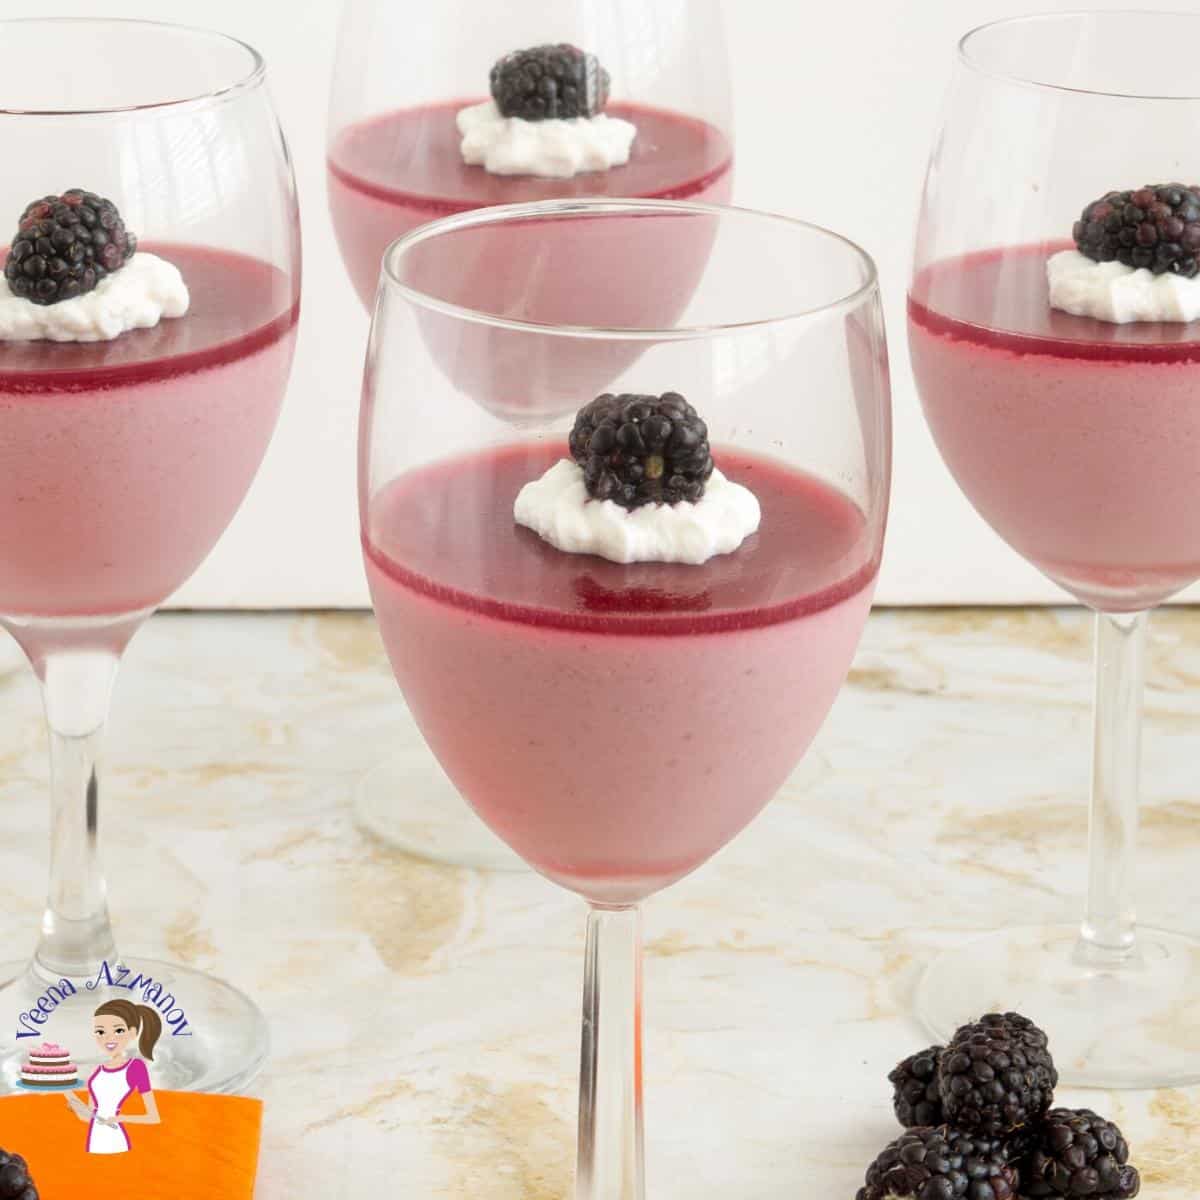 4 wine glasses filled with blackberry Panna Cotta.